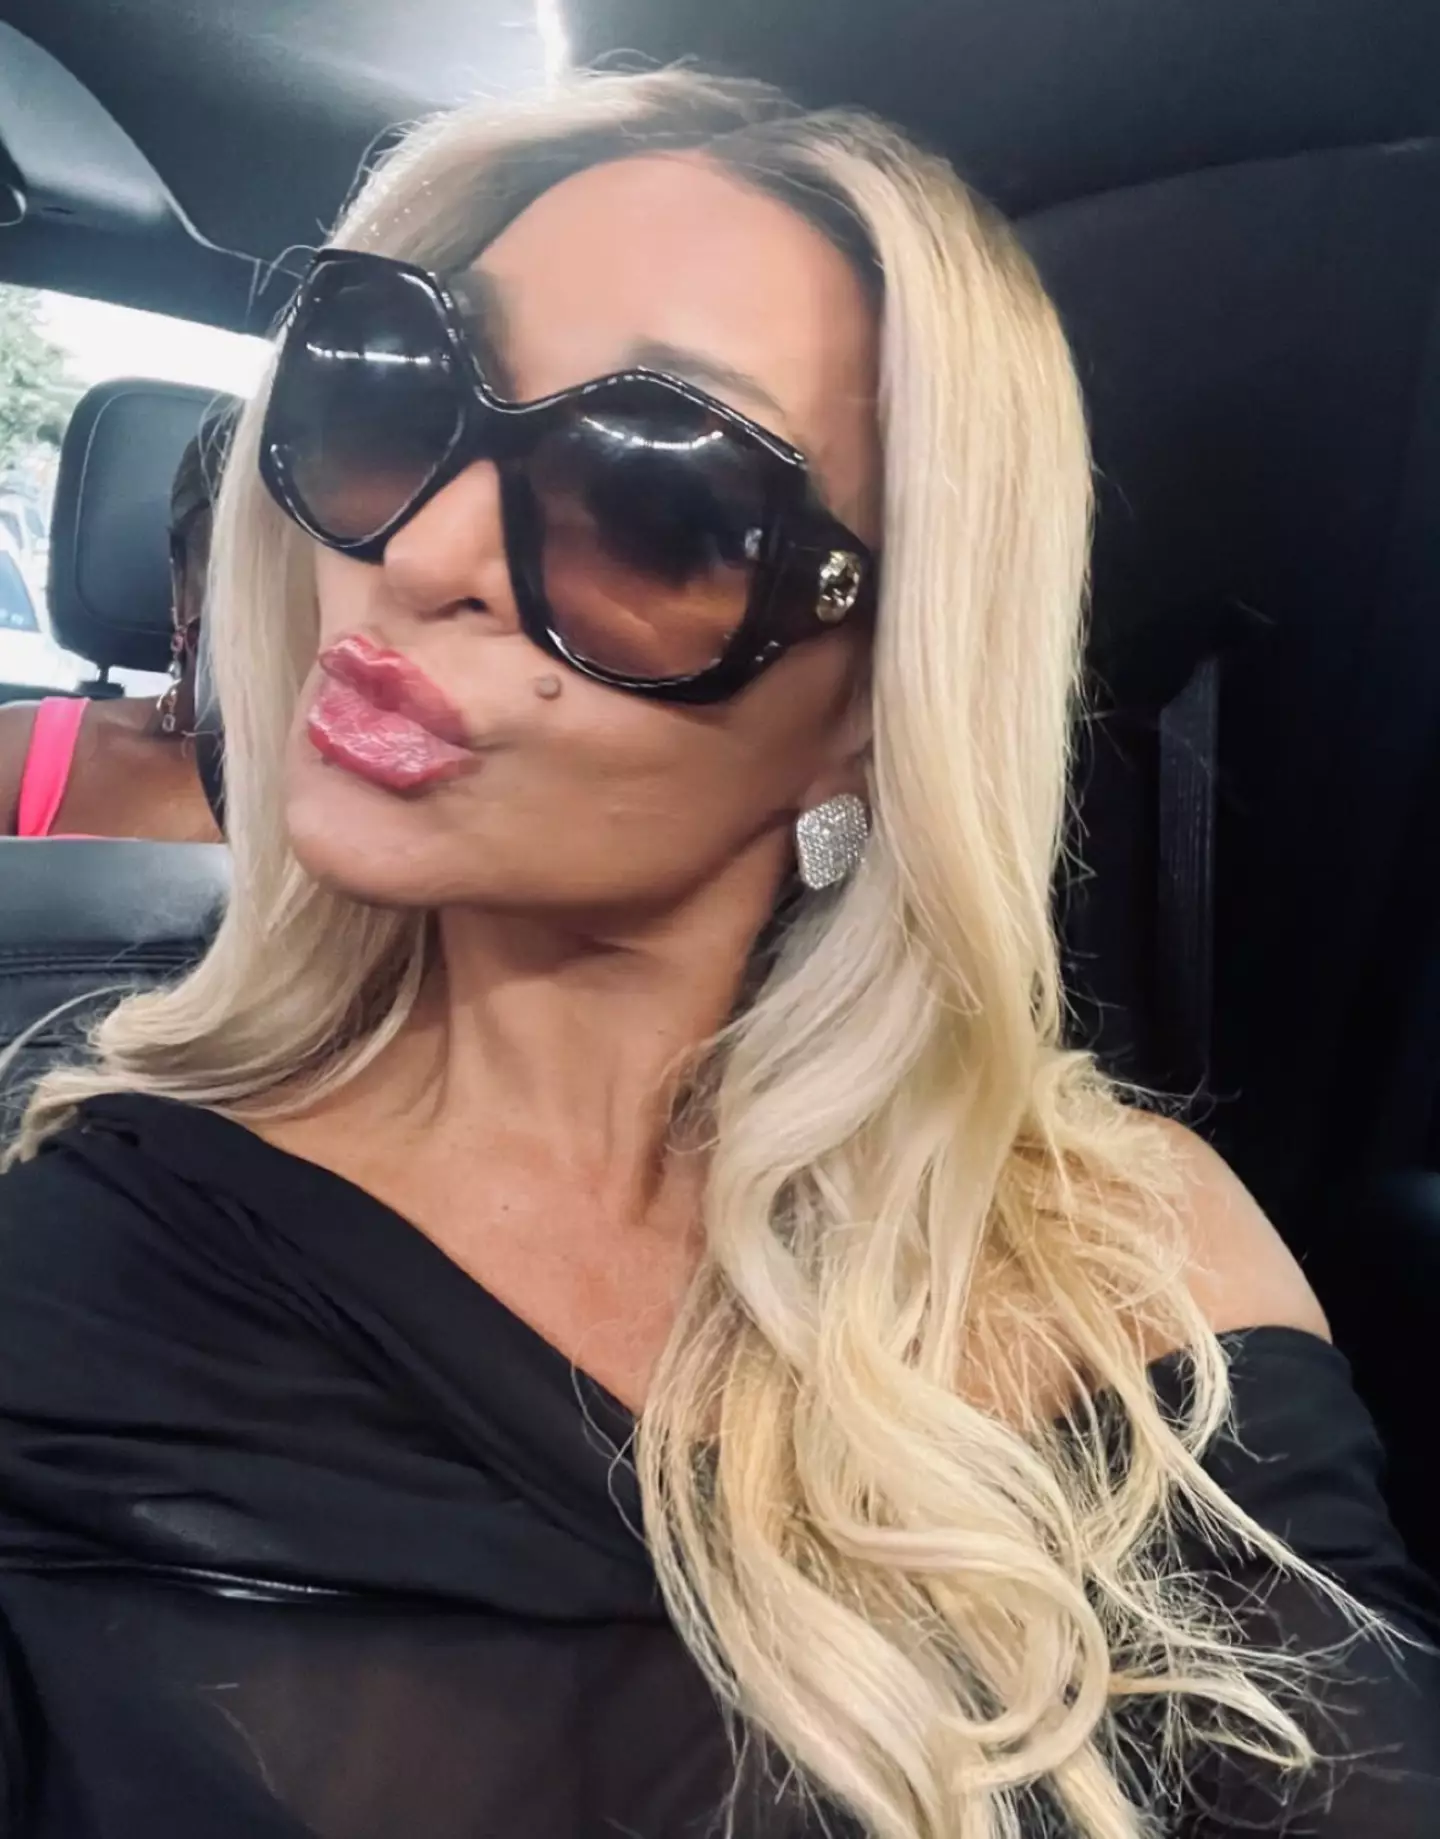 The Real Housewives star thanked fans for their well-wishes following her accident.